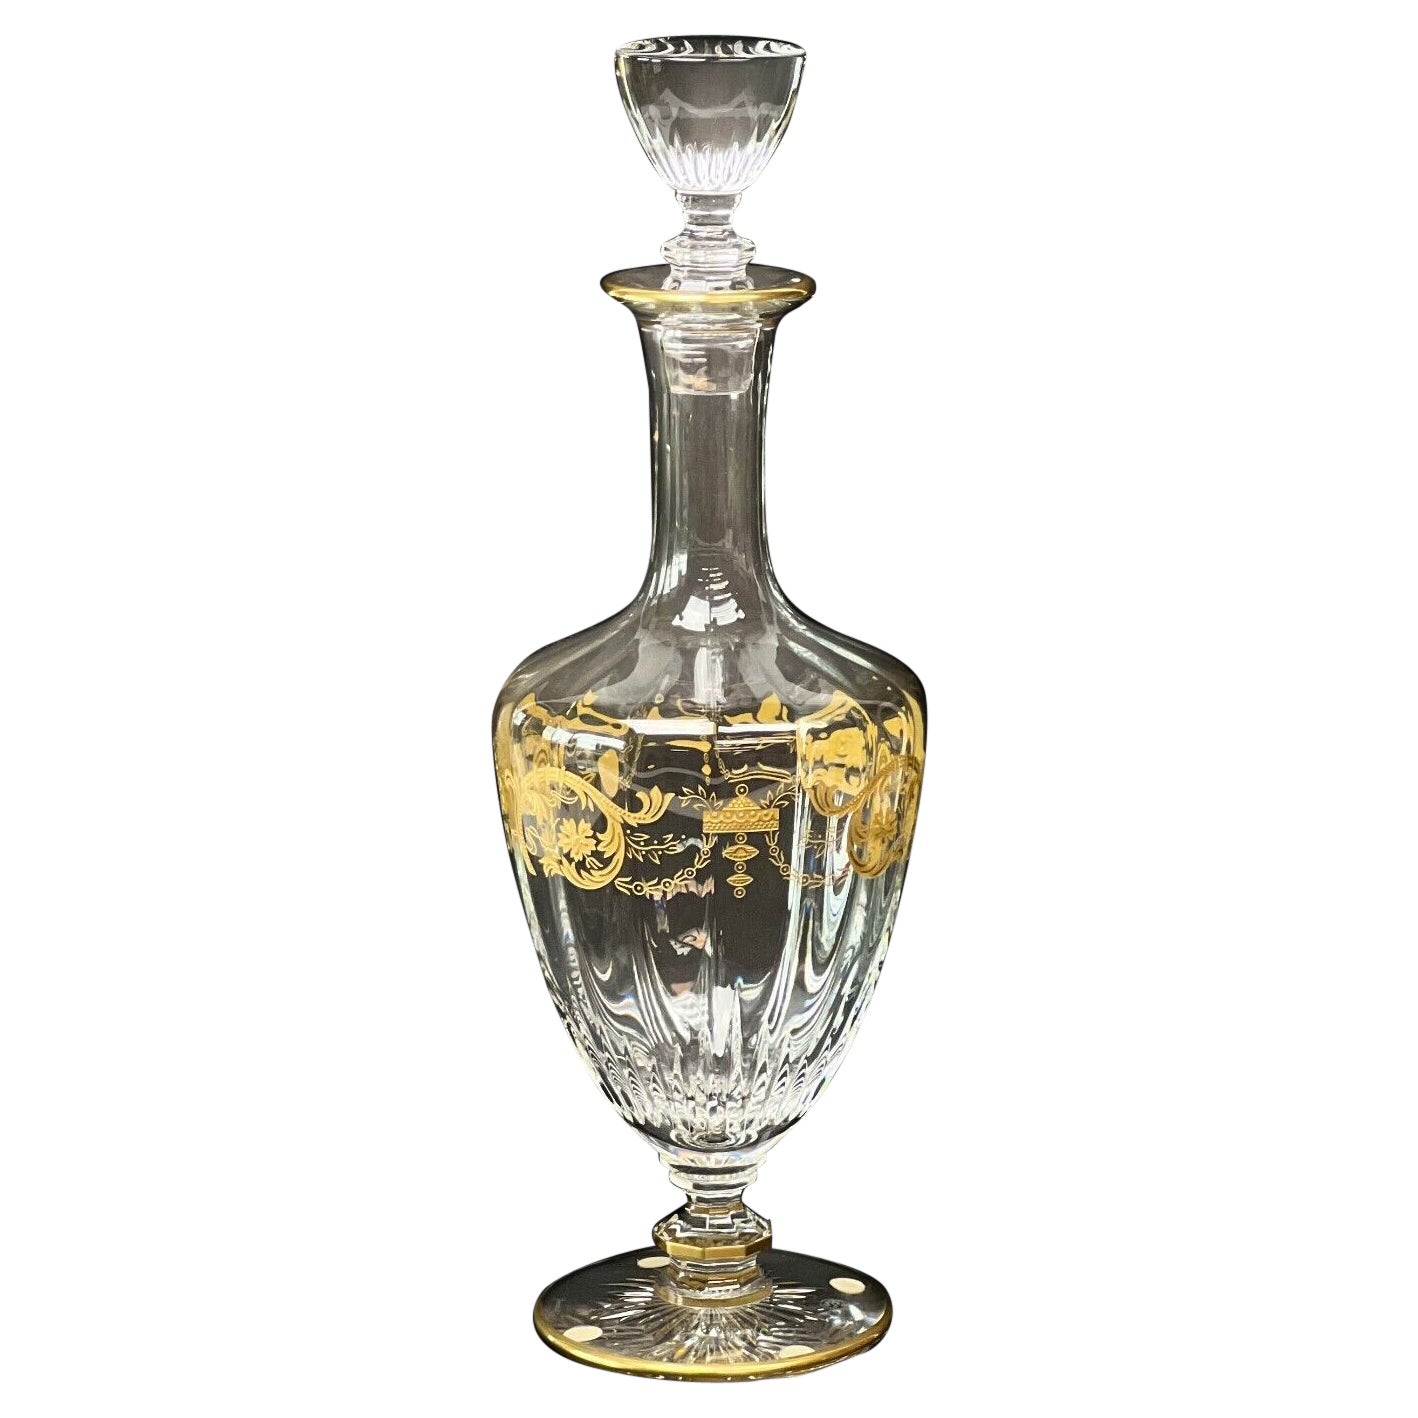 Baccarat France Crystal Glass Decanter in Imperator Gilt Gold Scrolls